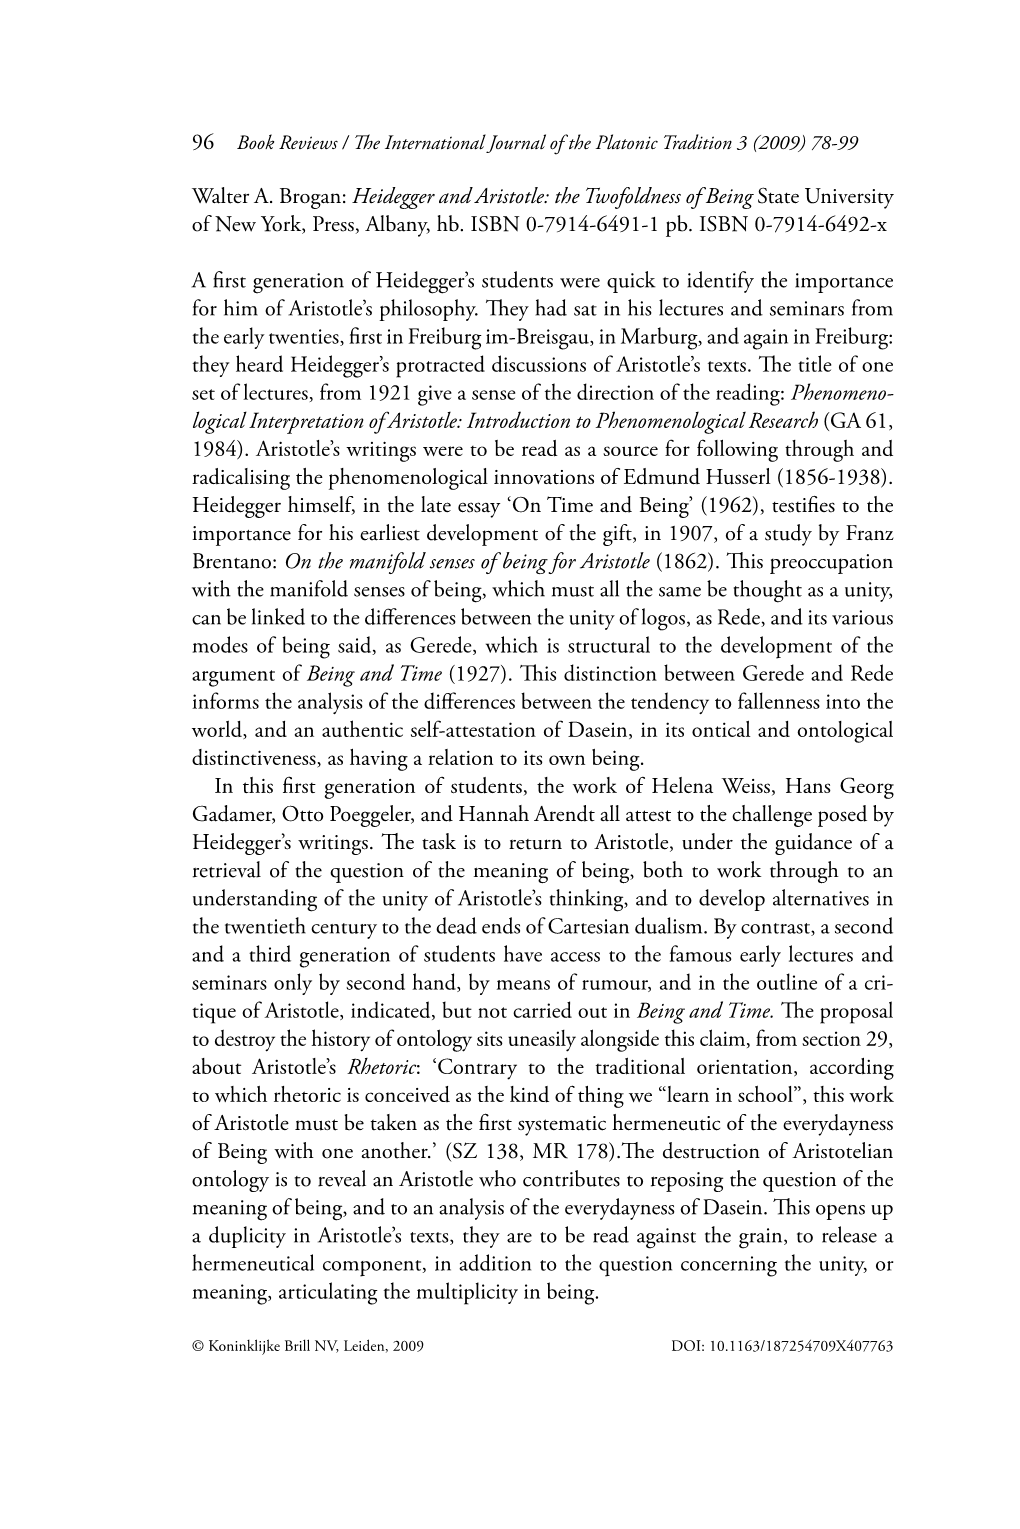 Walter A. Brogan: Heidegger and Aristotle: the Twofoldness of Being State University of New York, Press, Albany, Hb